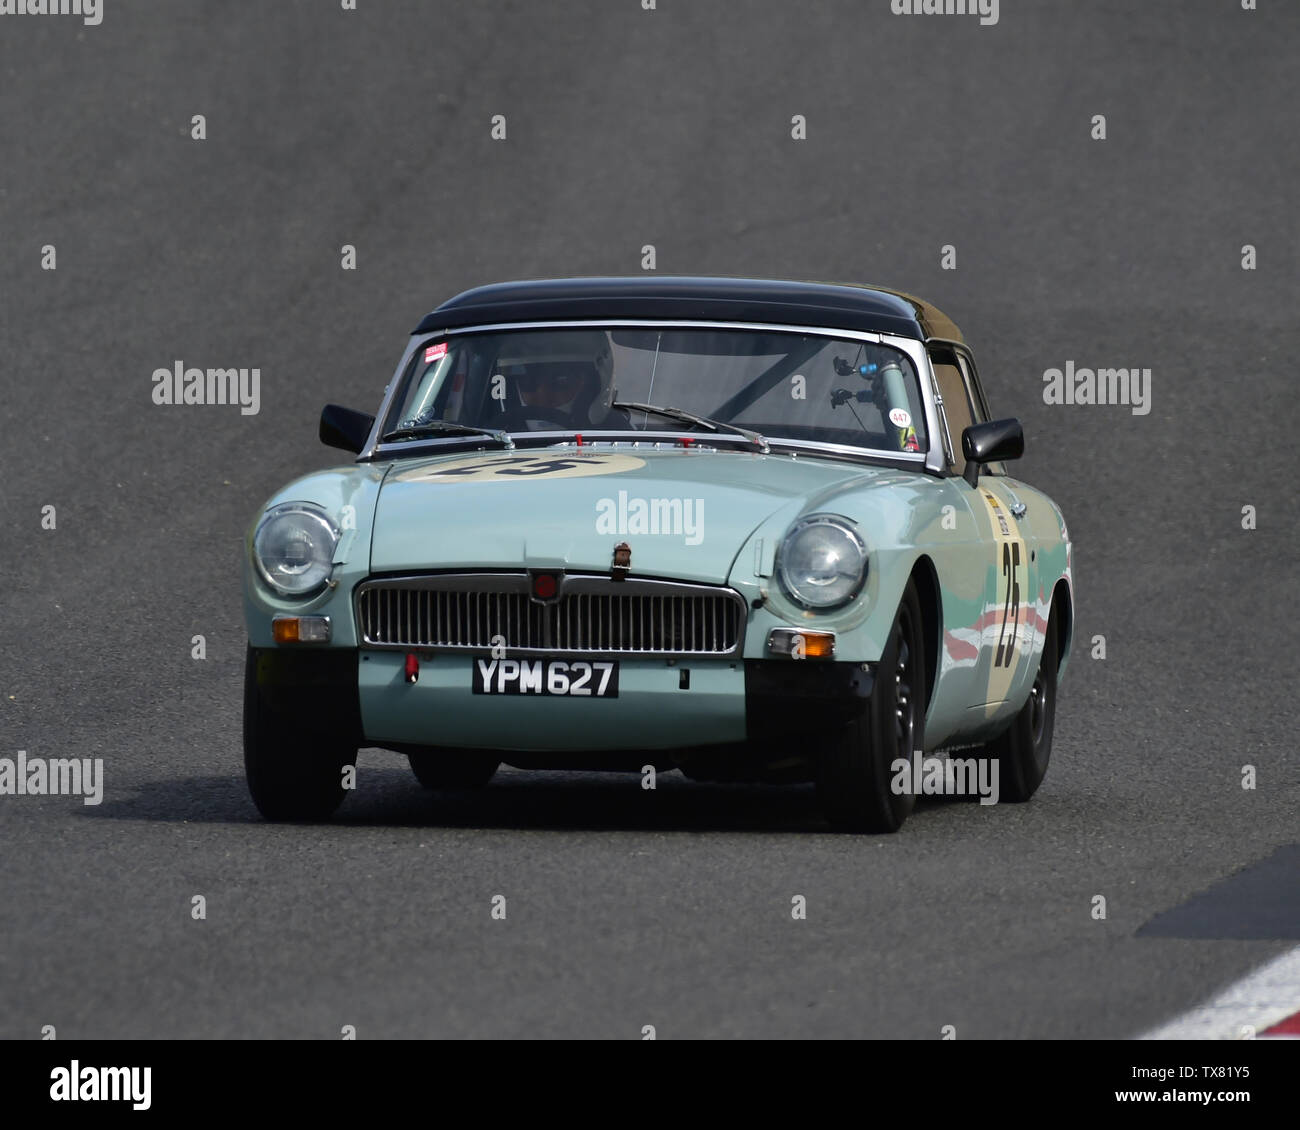 Niall Sinclair, MGB, Equipe GTS, Masters Historic Festival, Brands Hatch, May 2019. Brands Hatch, classic cars, classic event, Classic Racing Cars, FI Stock Photo